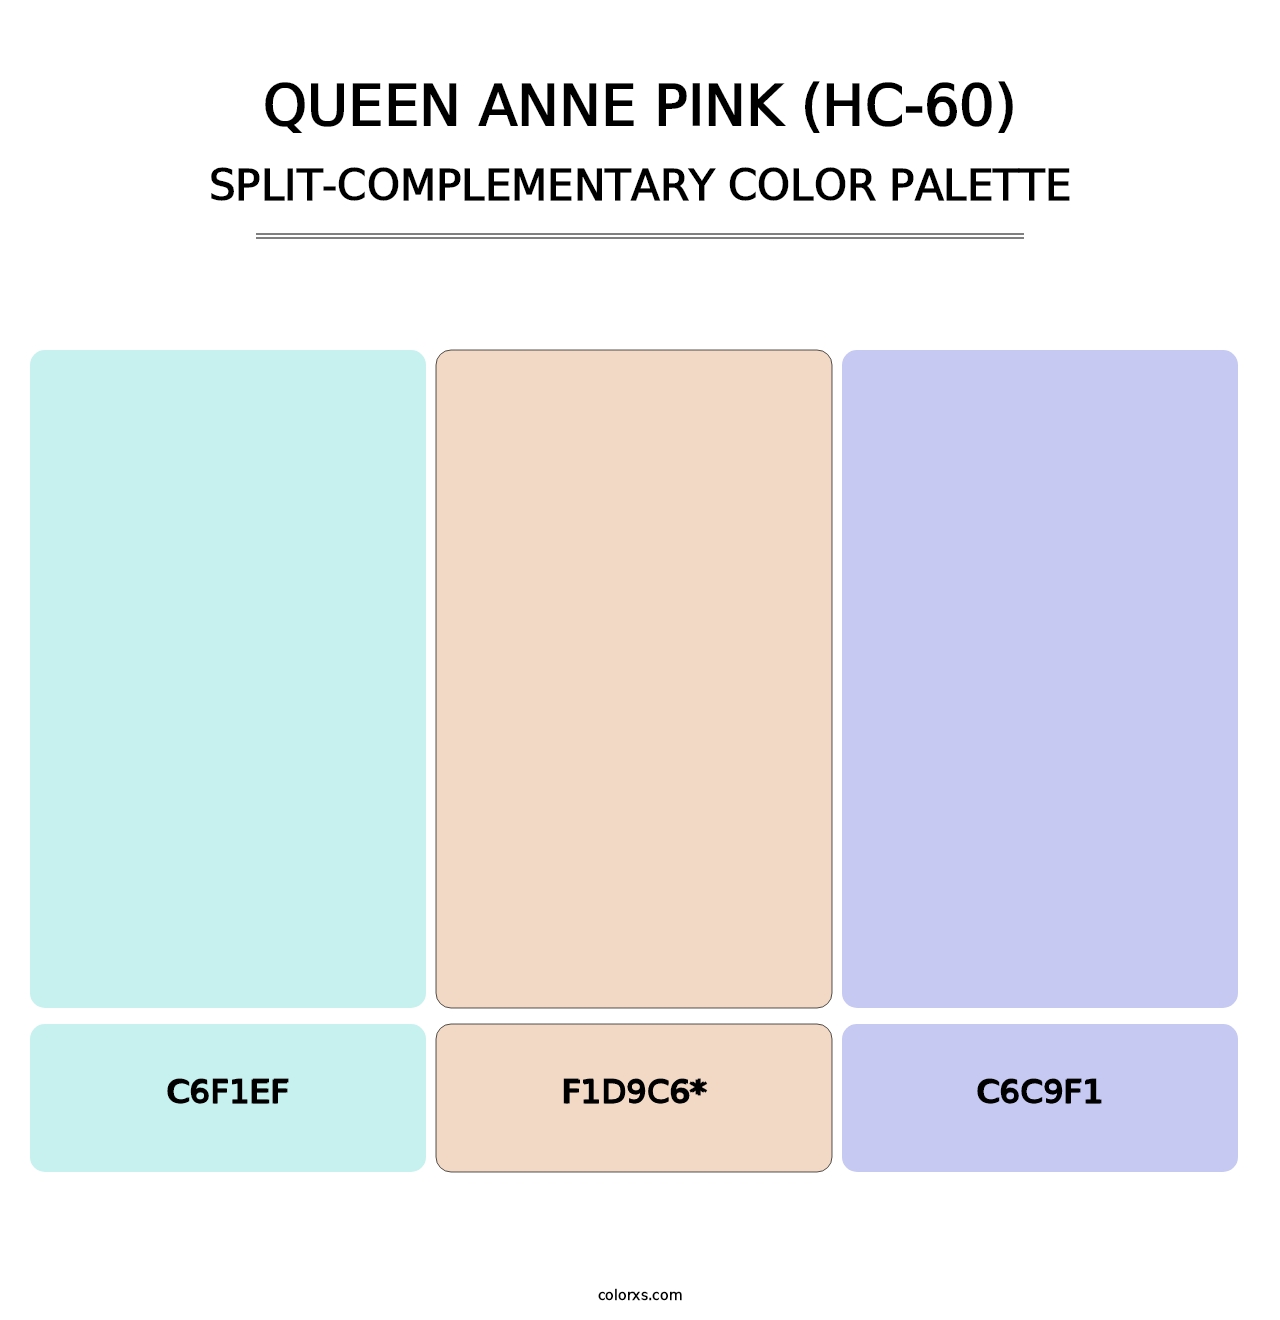 Queen Anne Pink (HC-60) - Split-Complementary Color Palette